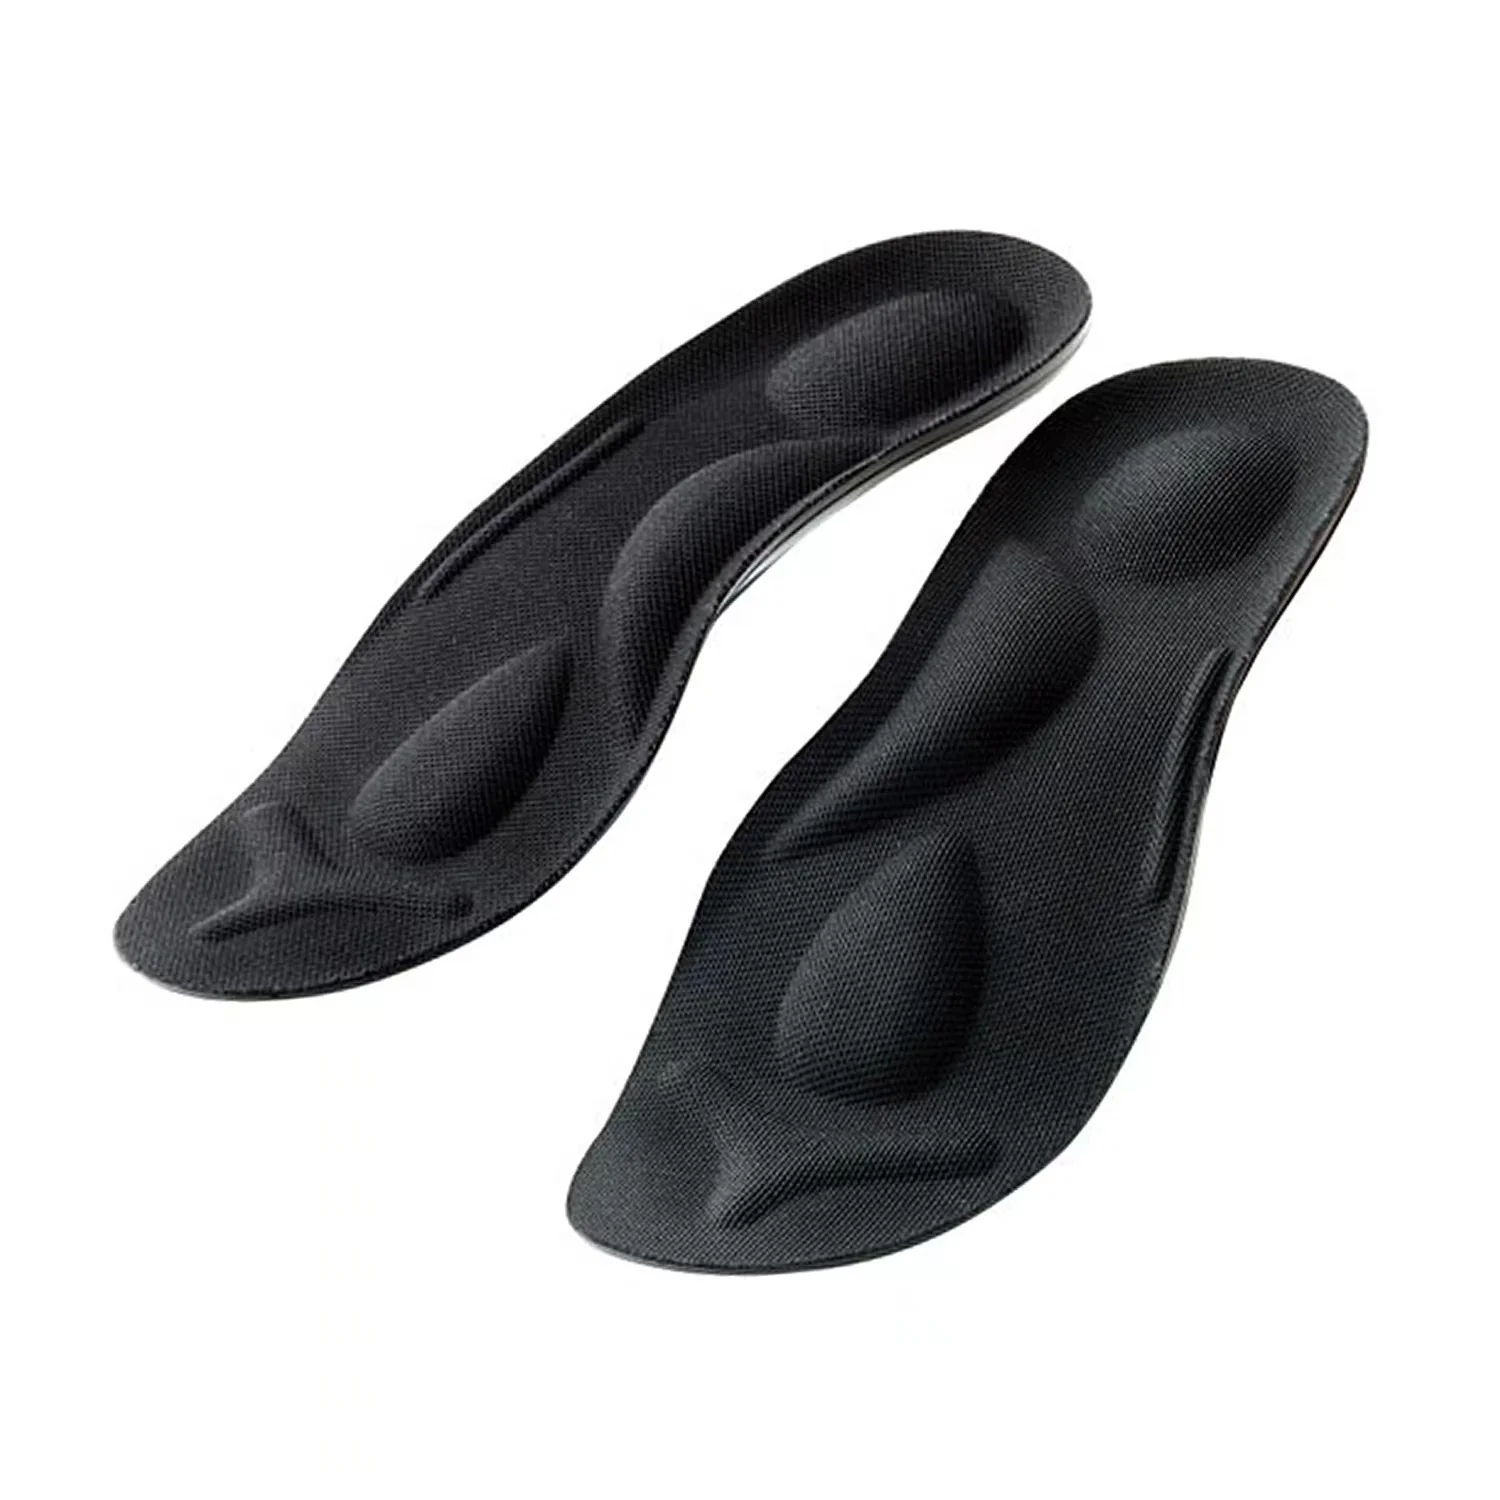 PU arch support 4D insoles for men soft soles comfortable sports shock absorbing sweat anti-odor massage leisure full cushion